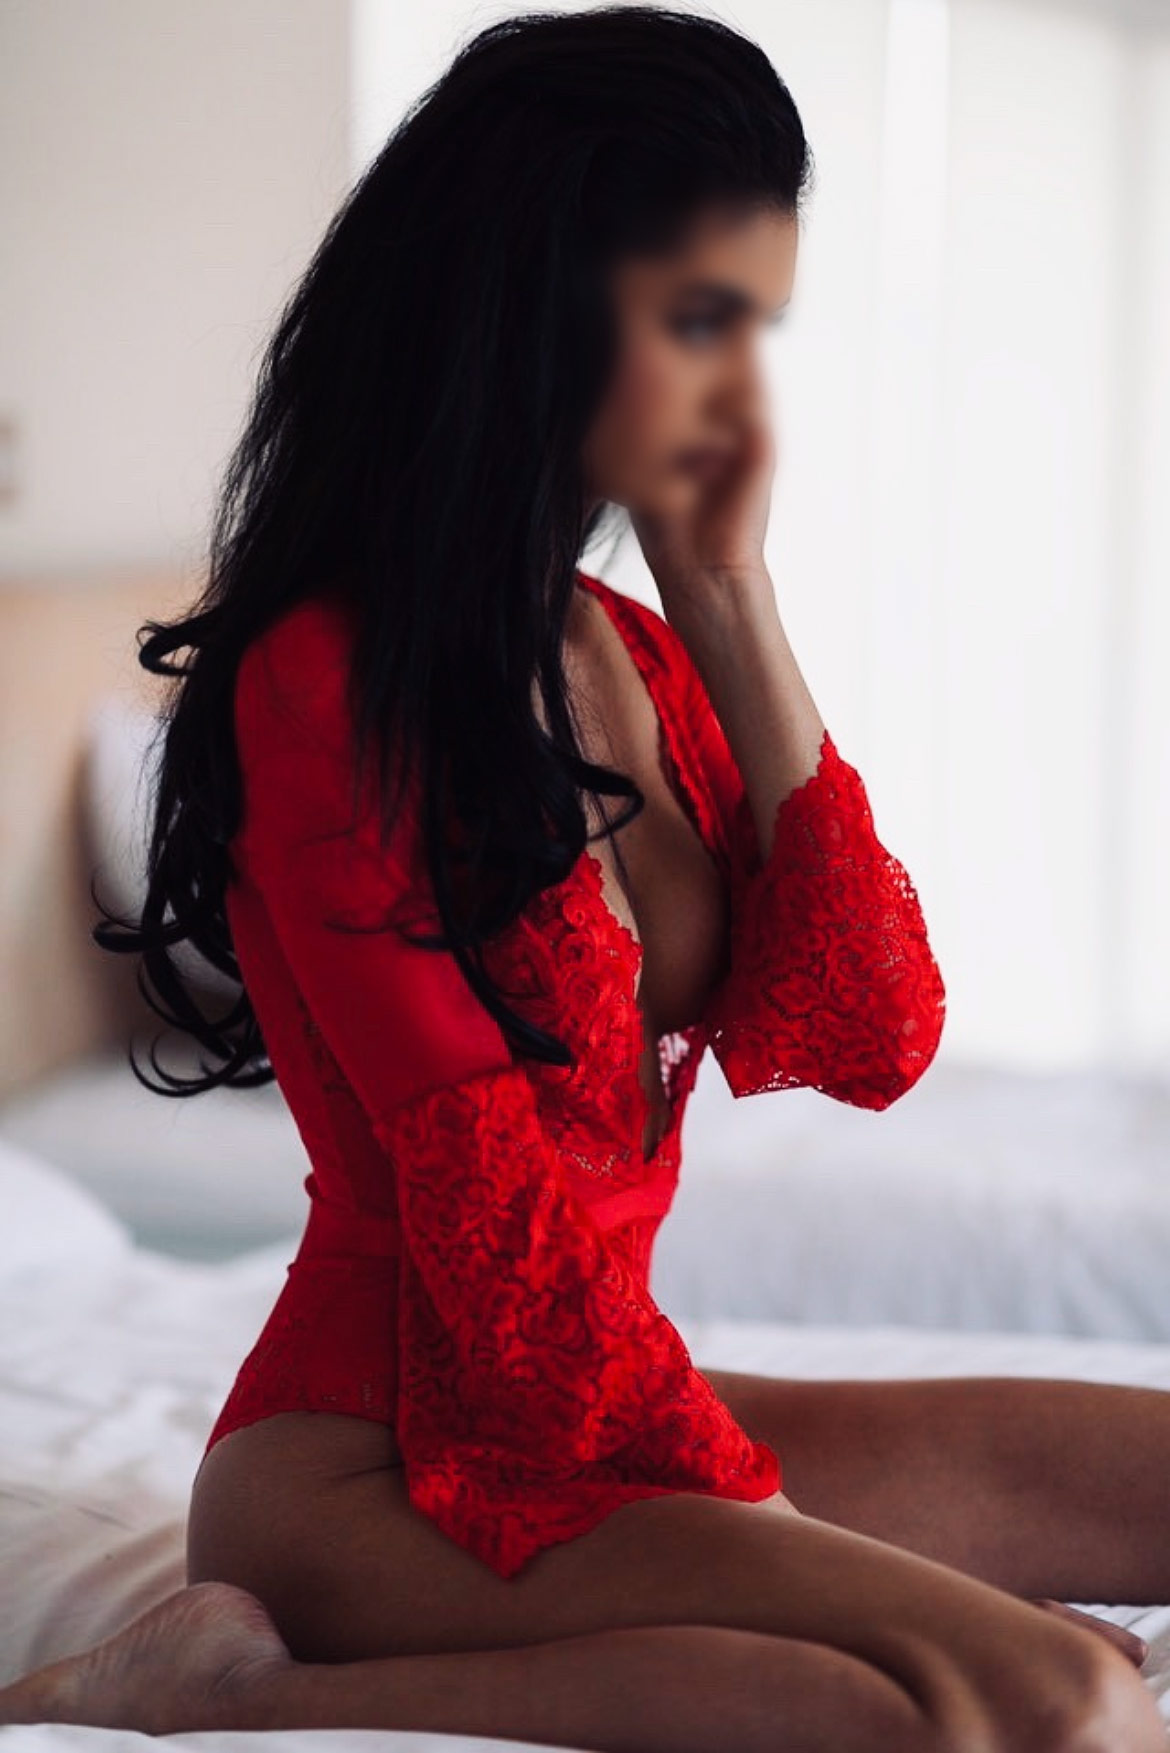 Woman in bed wearing red dress